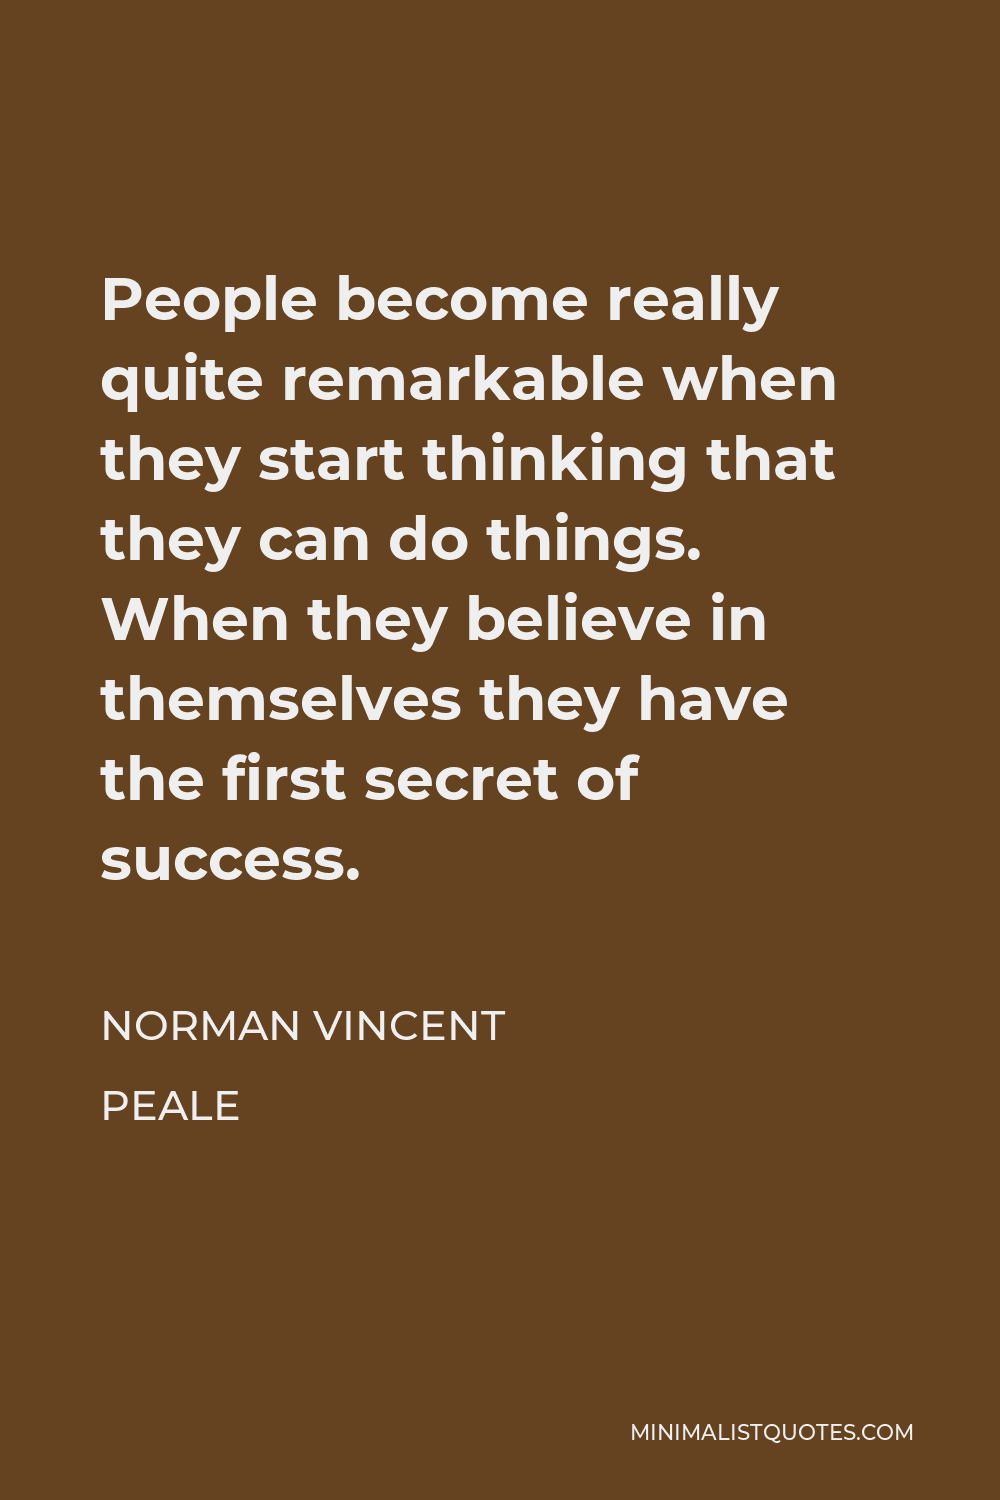 Norman Vincent Peale Quote - People become really quite remarkable when they start thinking that they can do things. When they believe in themselves they have the first secret of success.